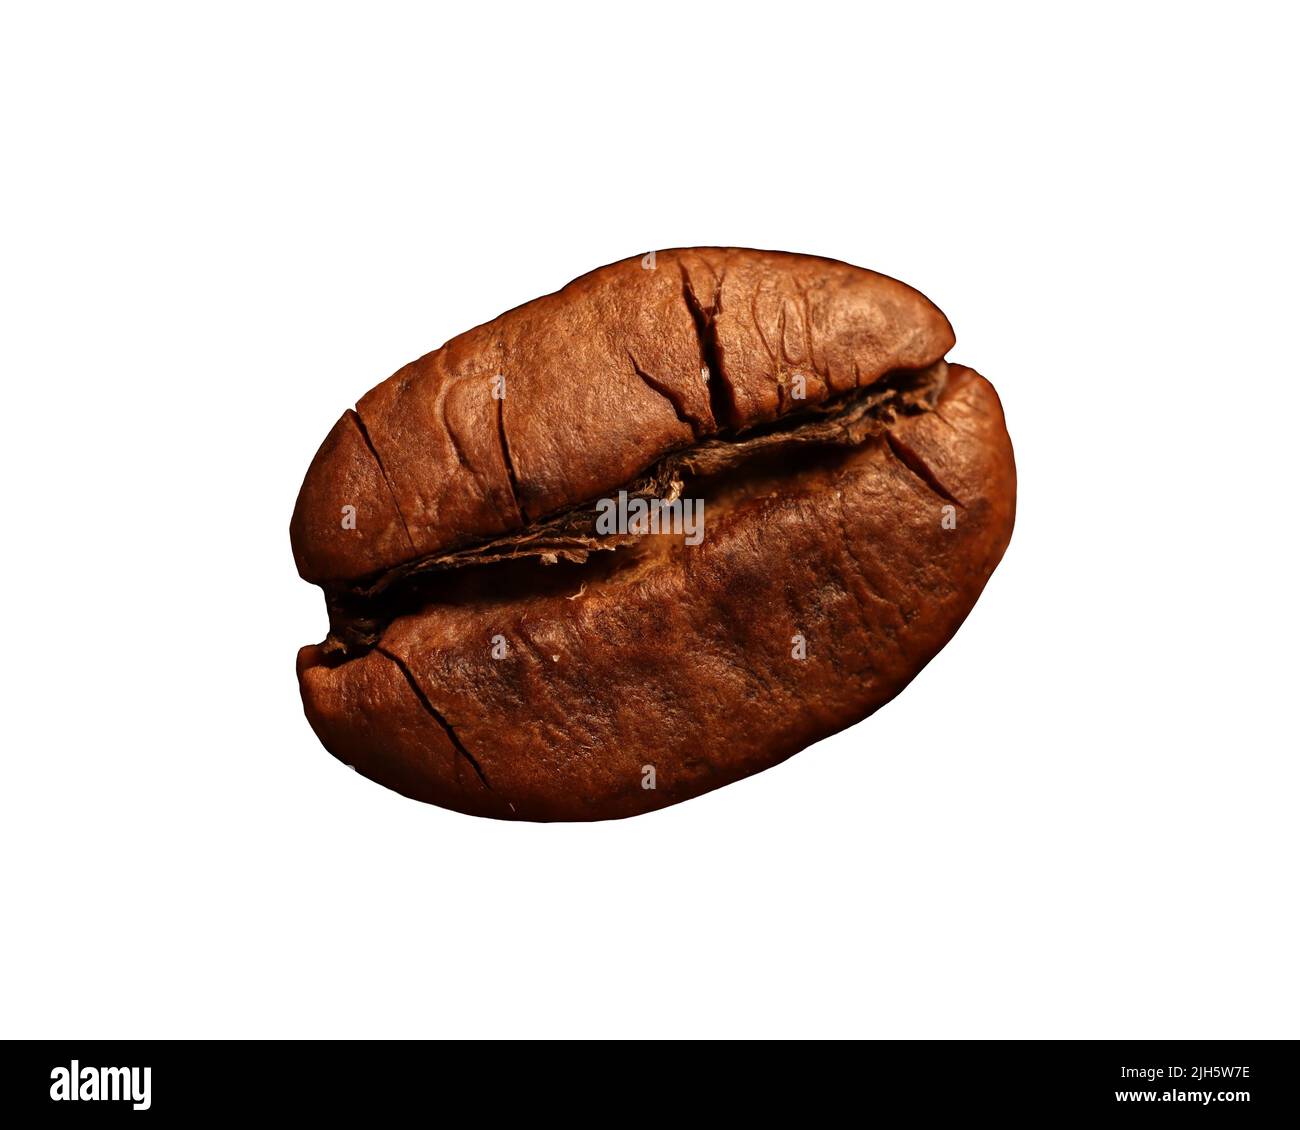 Roasted coffee beans on a white background Stock Photo